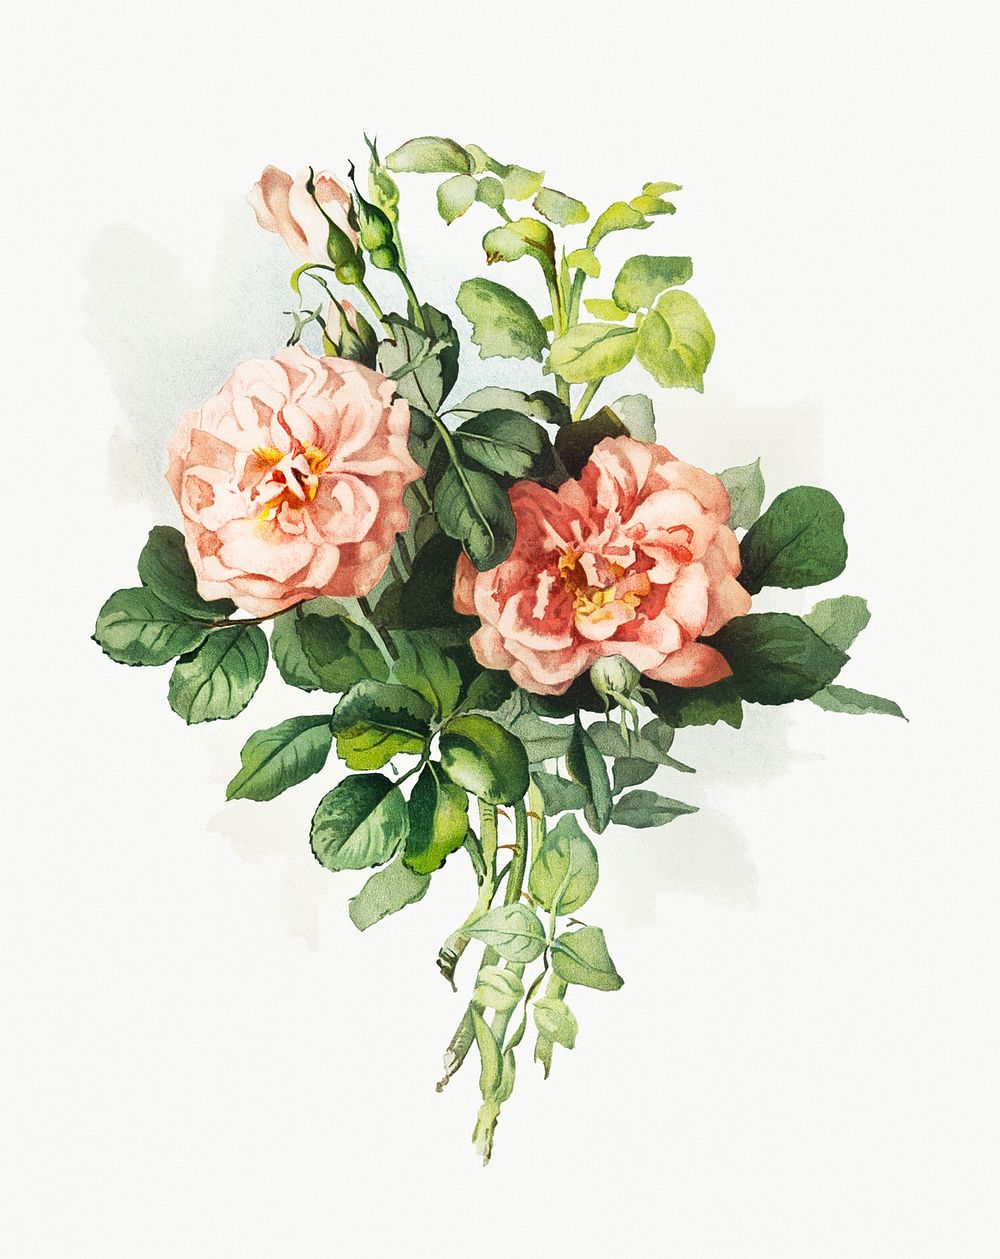 Antique illustration of blooming blush rose with leaves